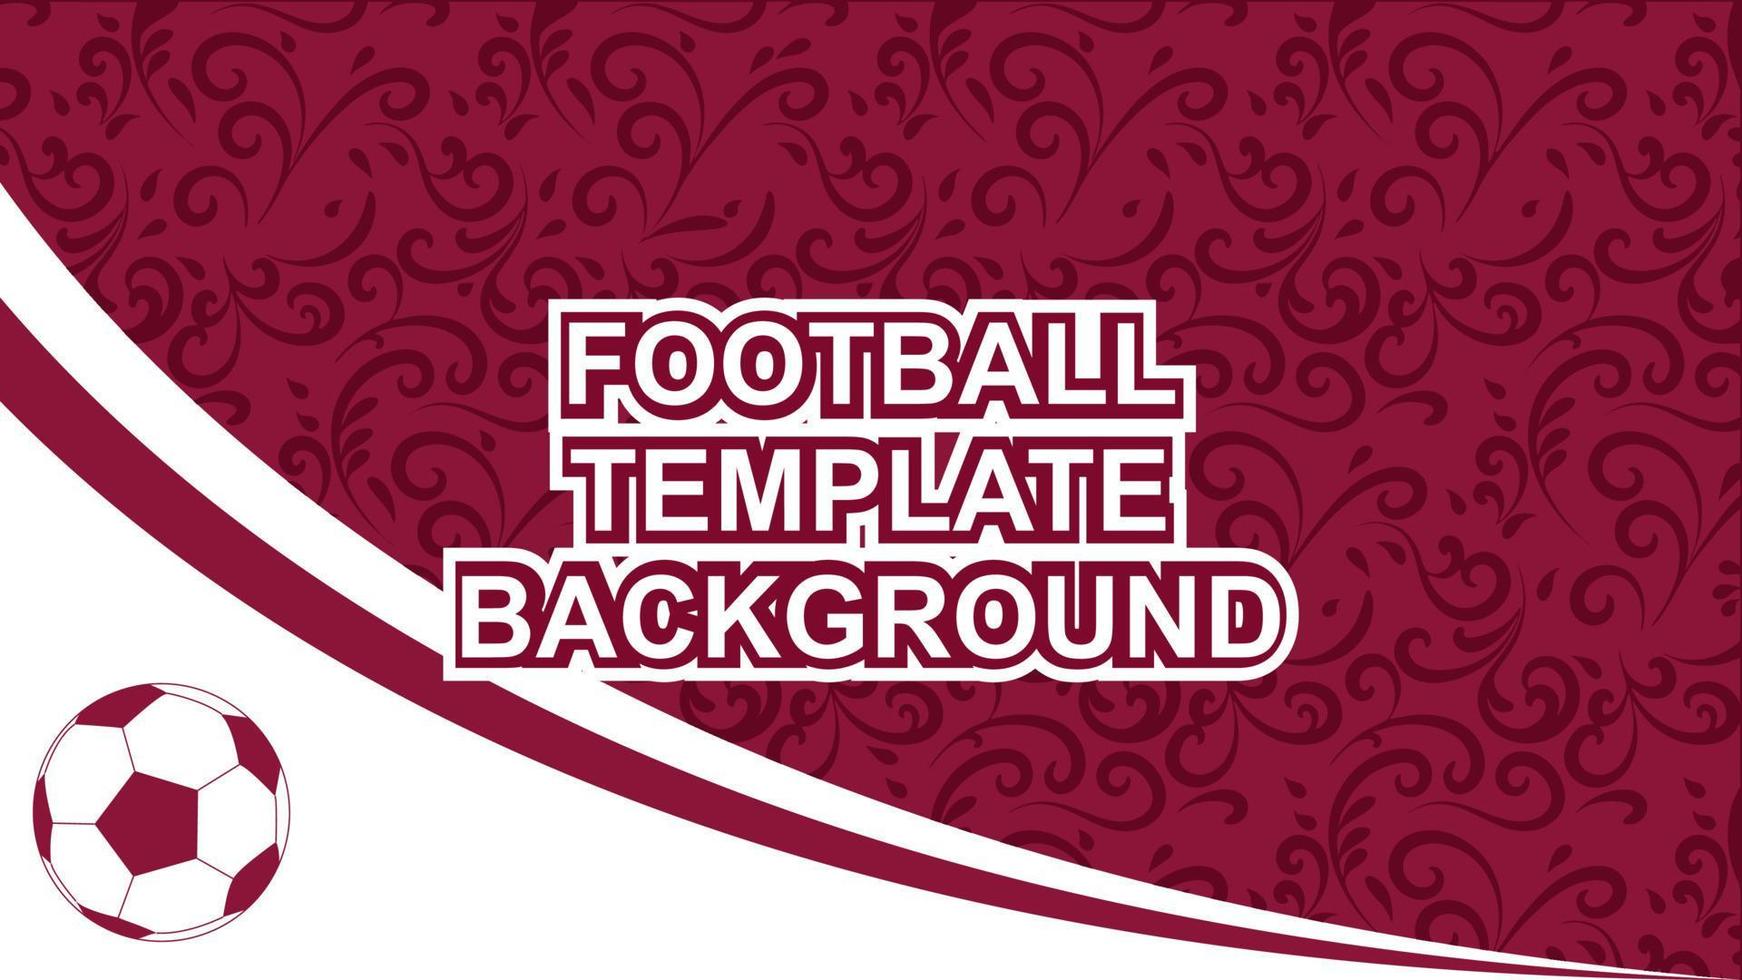 Football background with pattern design red white vector